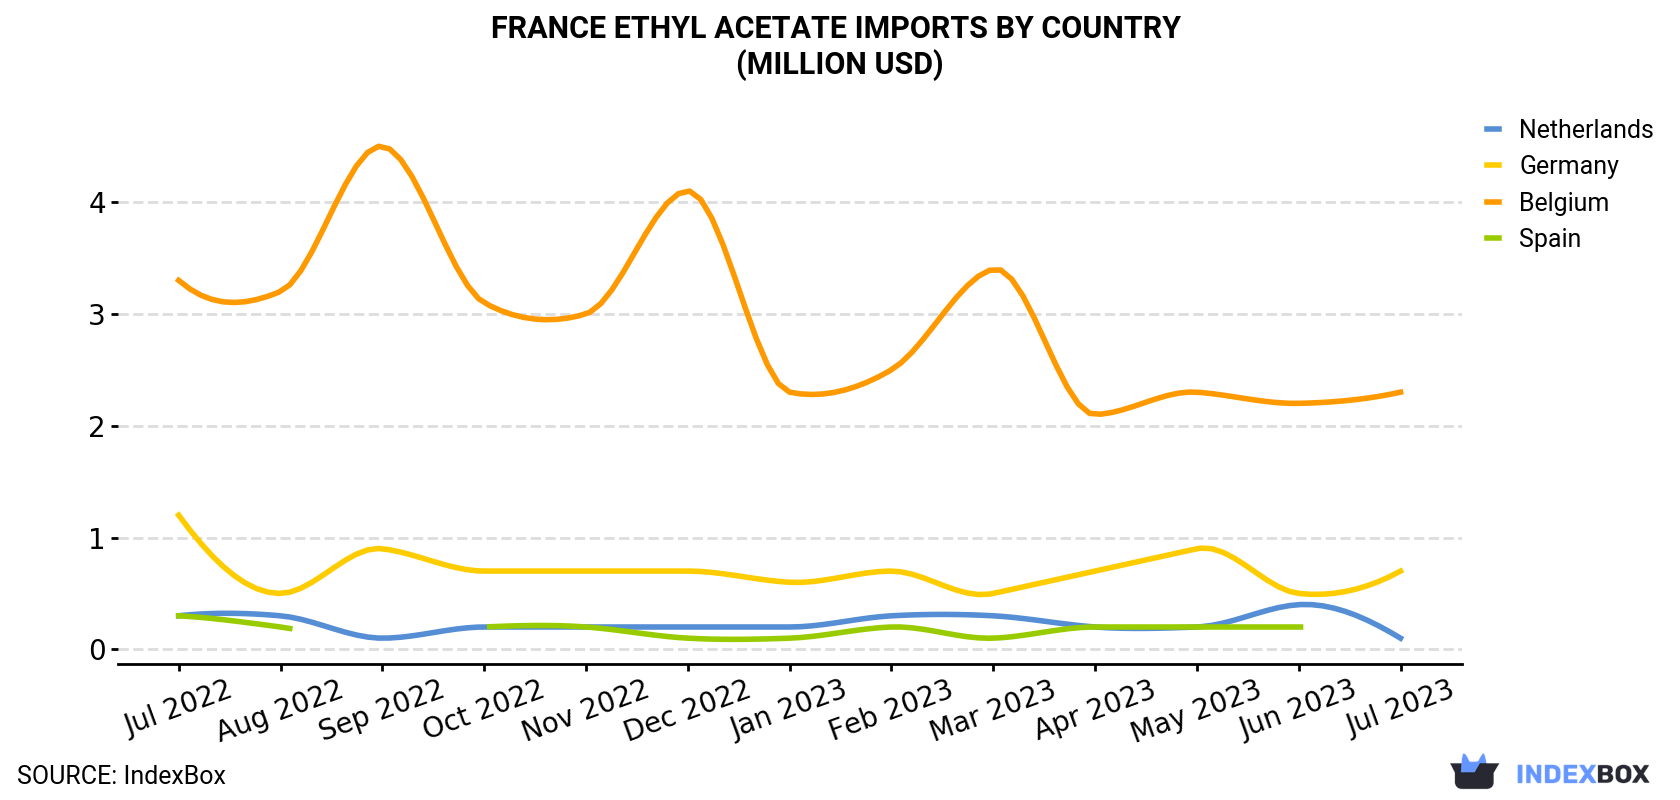 France Ethyl Acetate Imports By Country (Million USD)